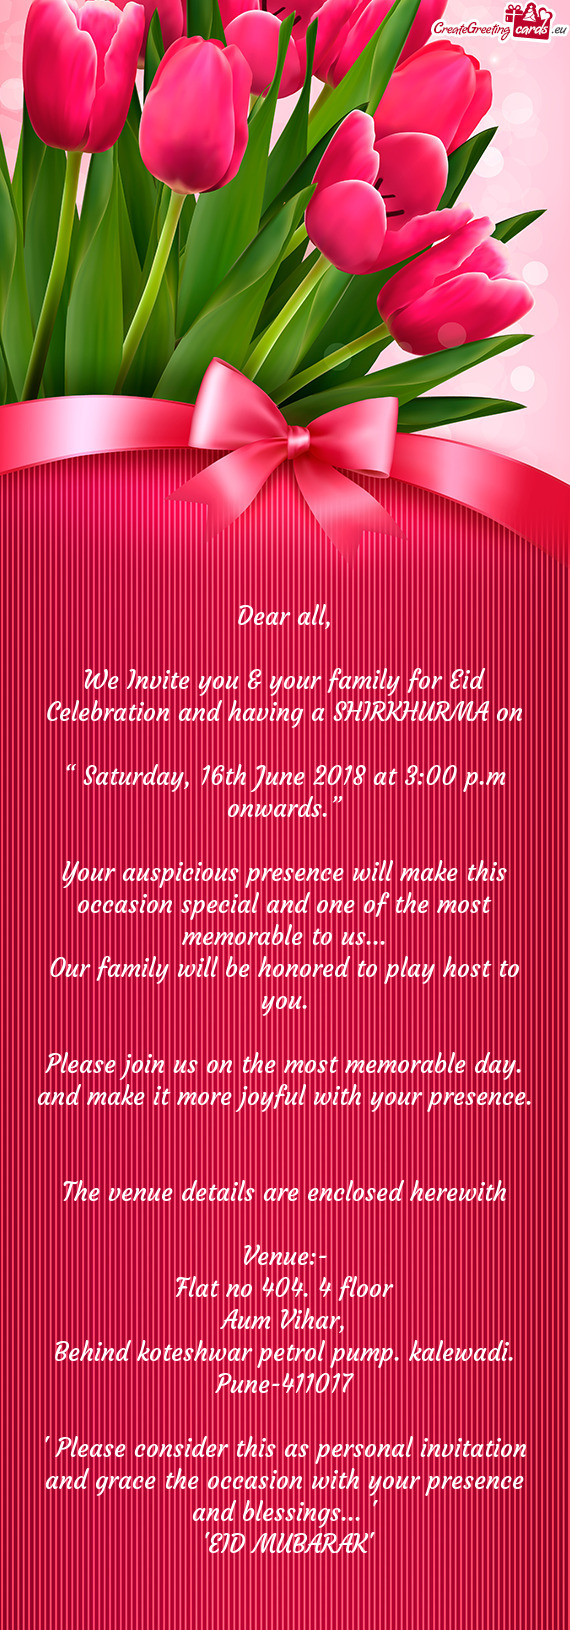 We Invite you & your family for Eid Celebration and having a SHIRKHURMA on